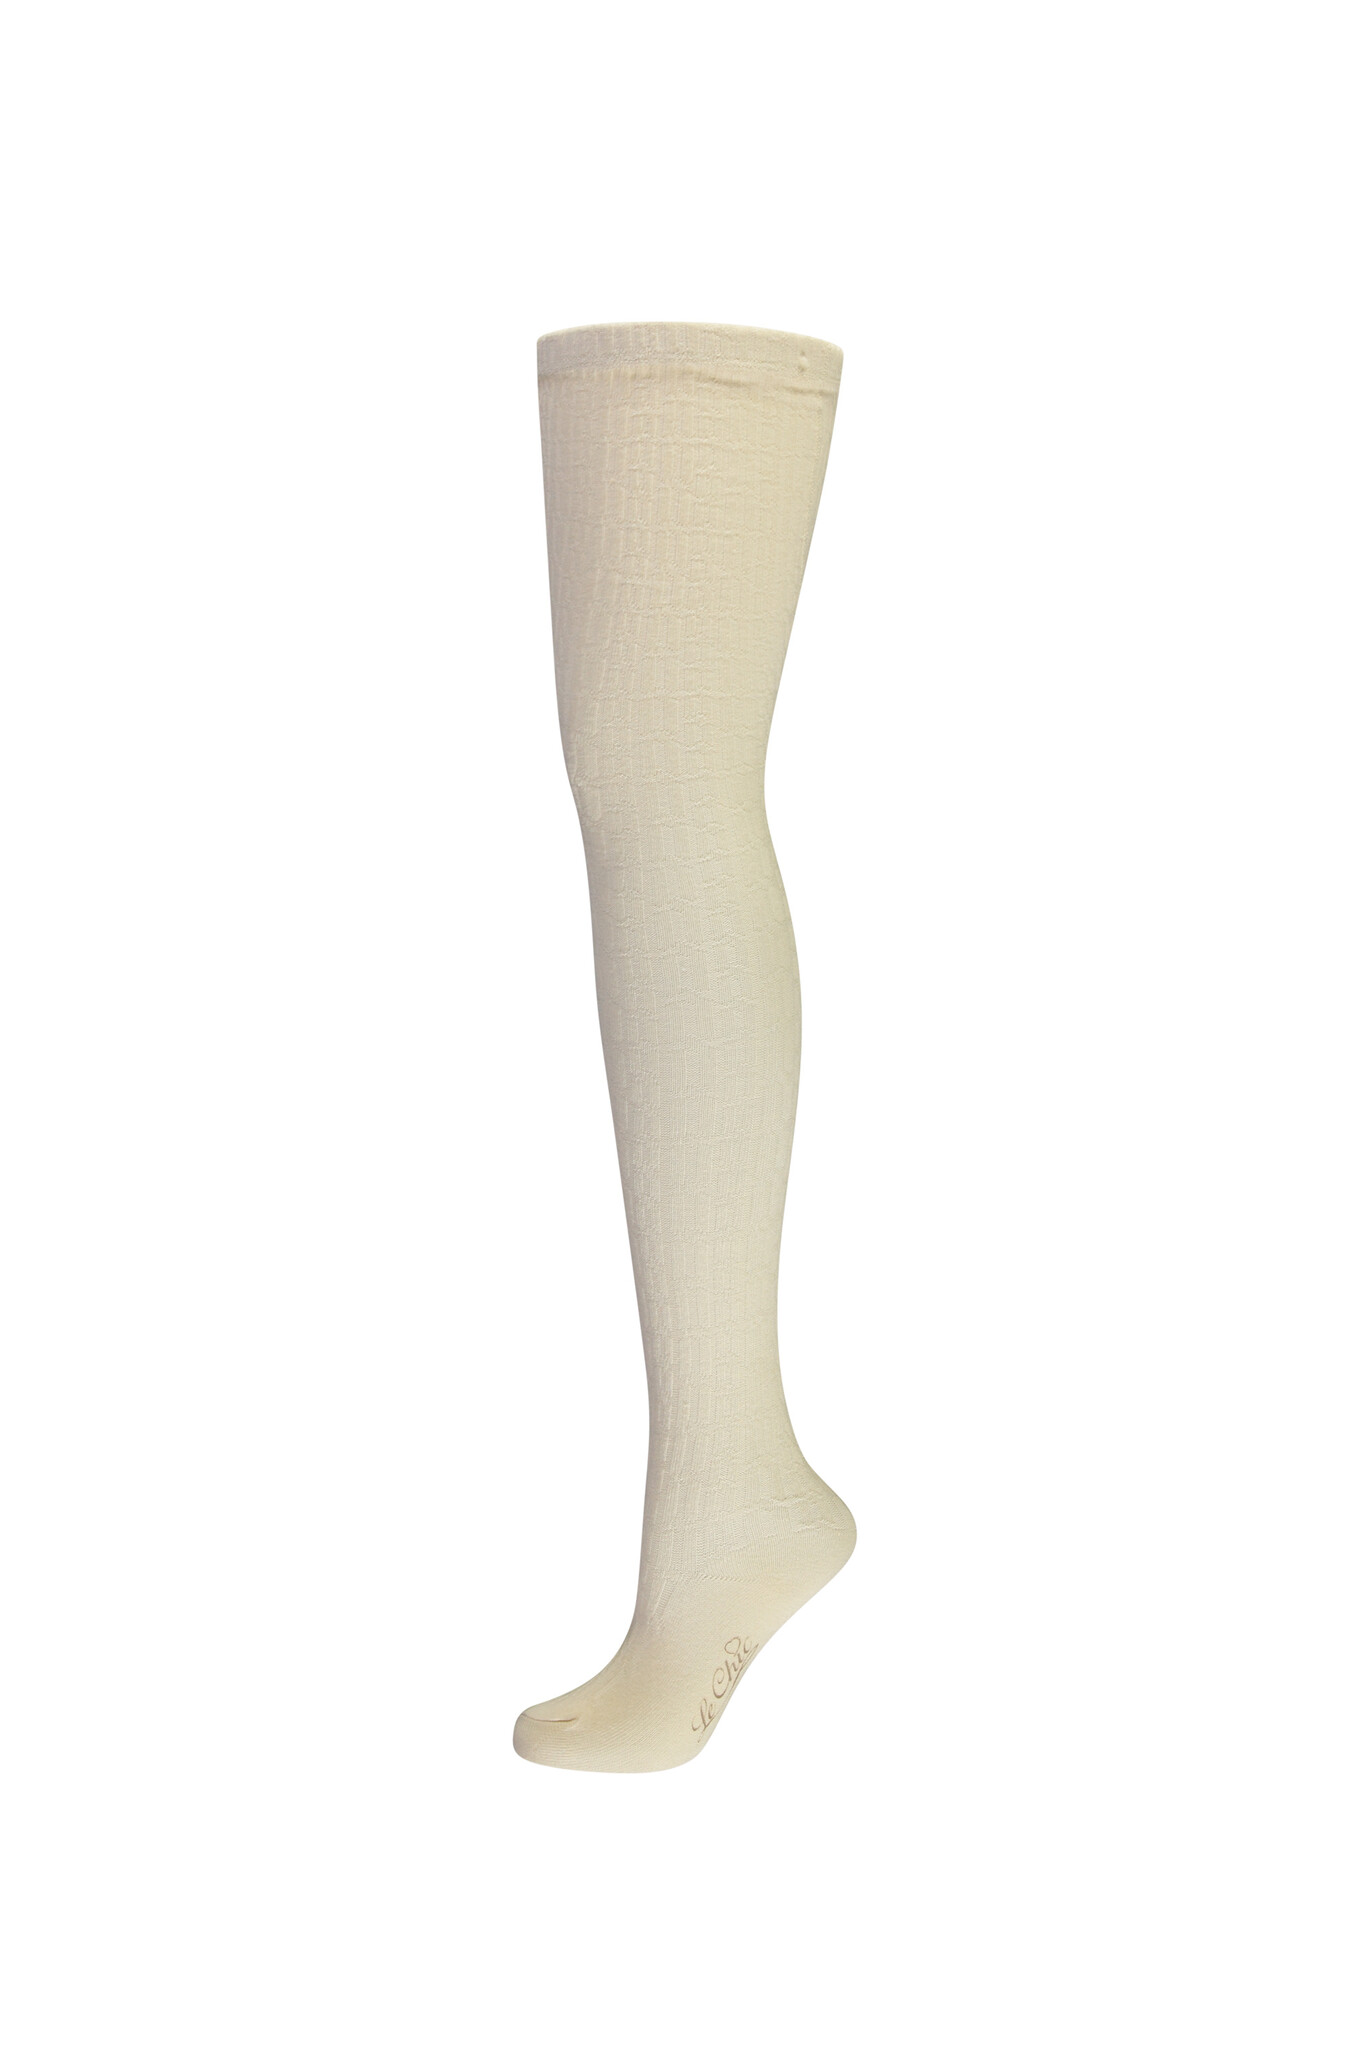 Le Chic C308-5910 Meisjes Maillot - Pearled Ivory - Maat 27-30